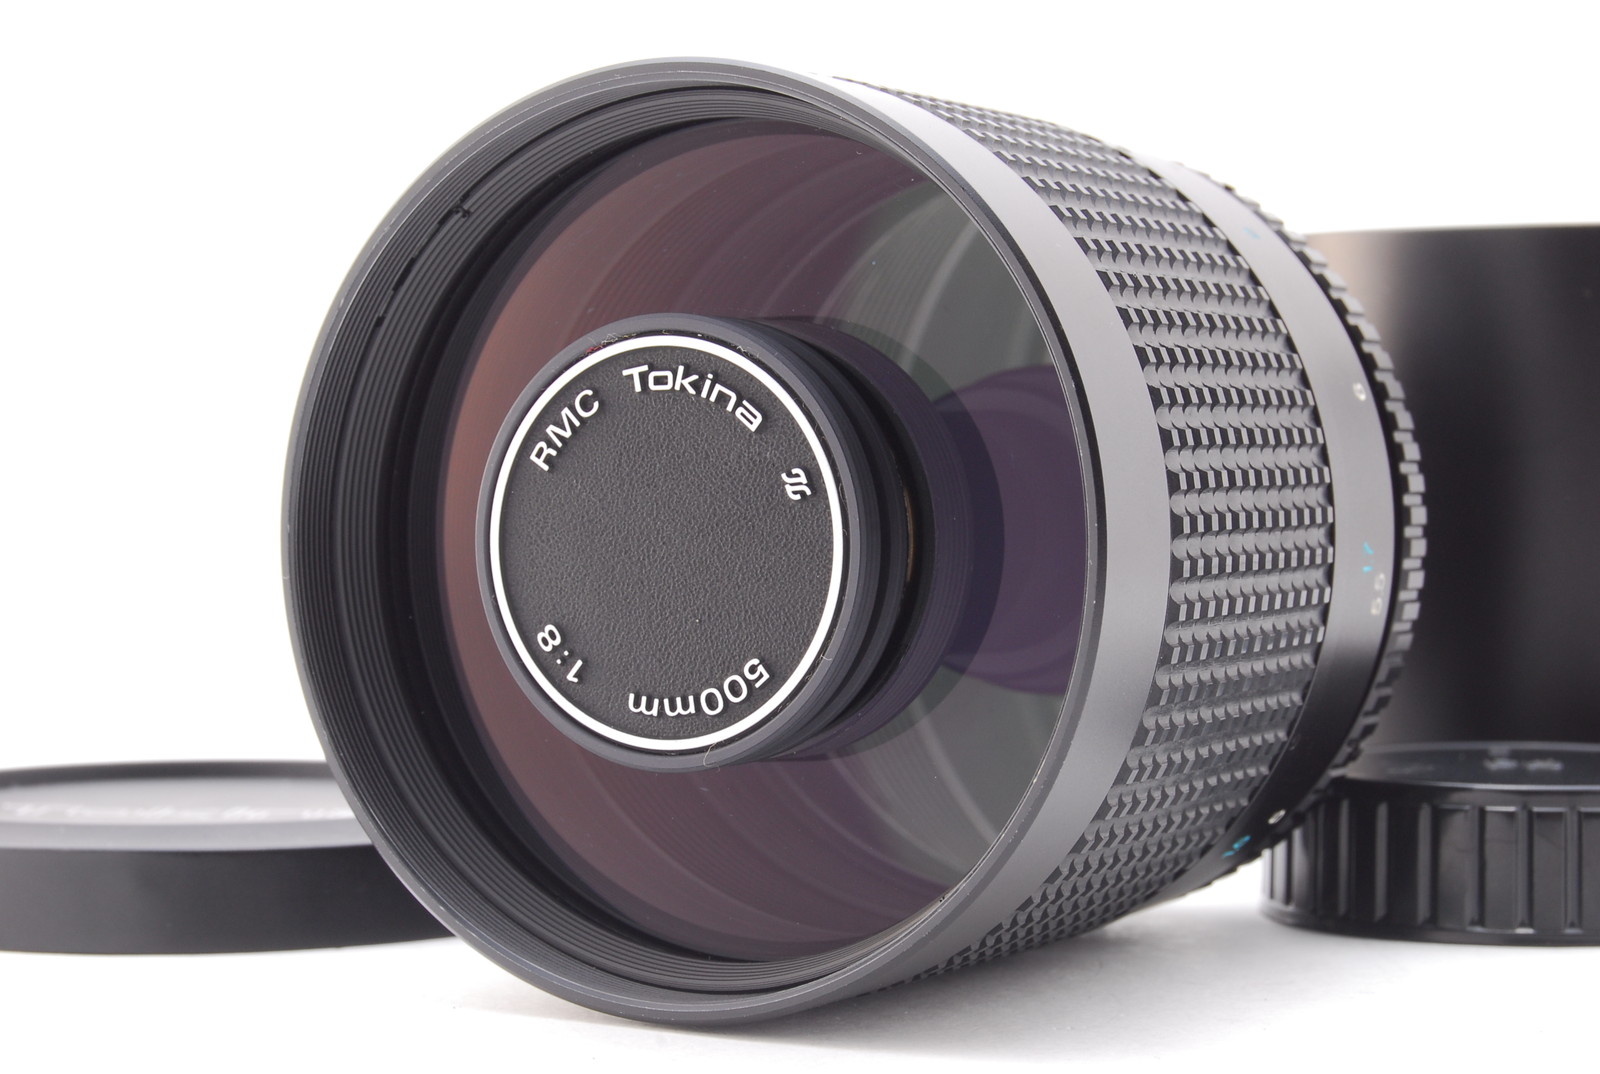 PROMOTION.MINT Tokina 500mm f/8 Mirror Reflex Lens for Pentax K, Hood, Caps from Japan